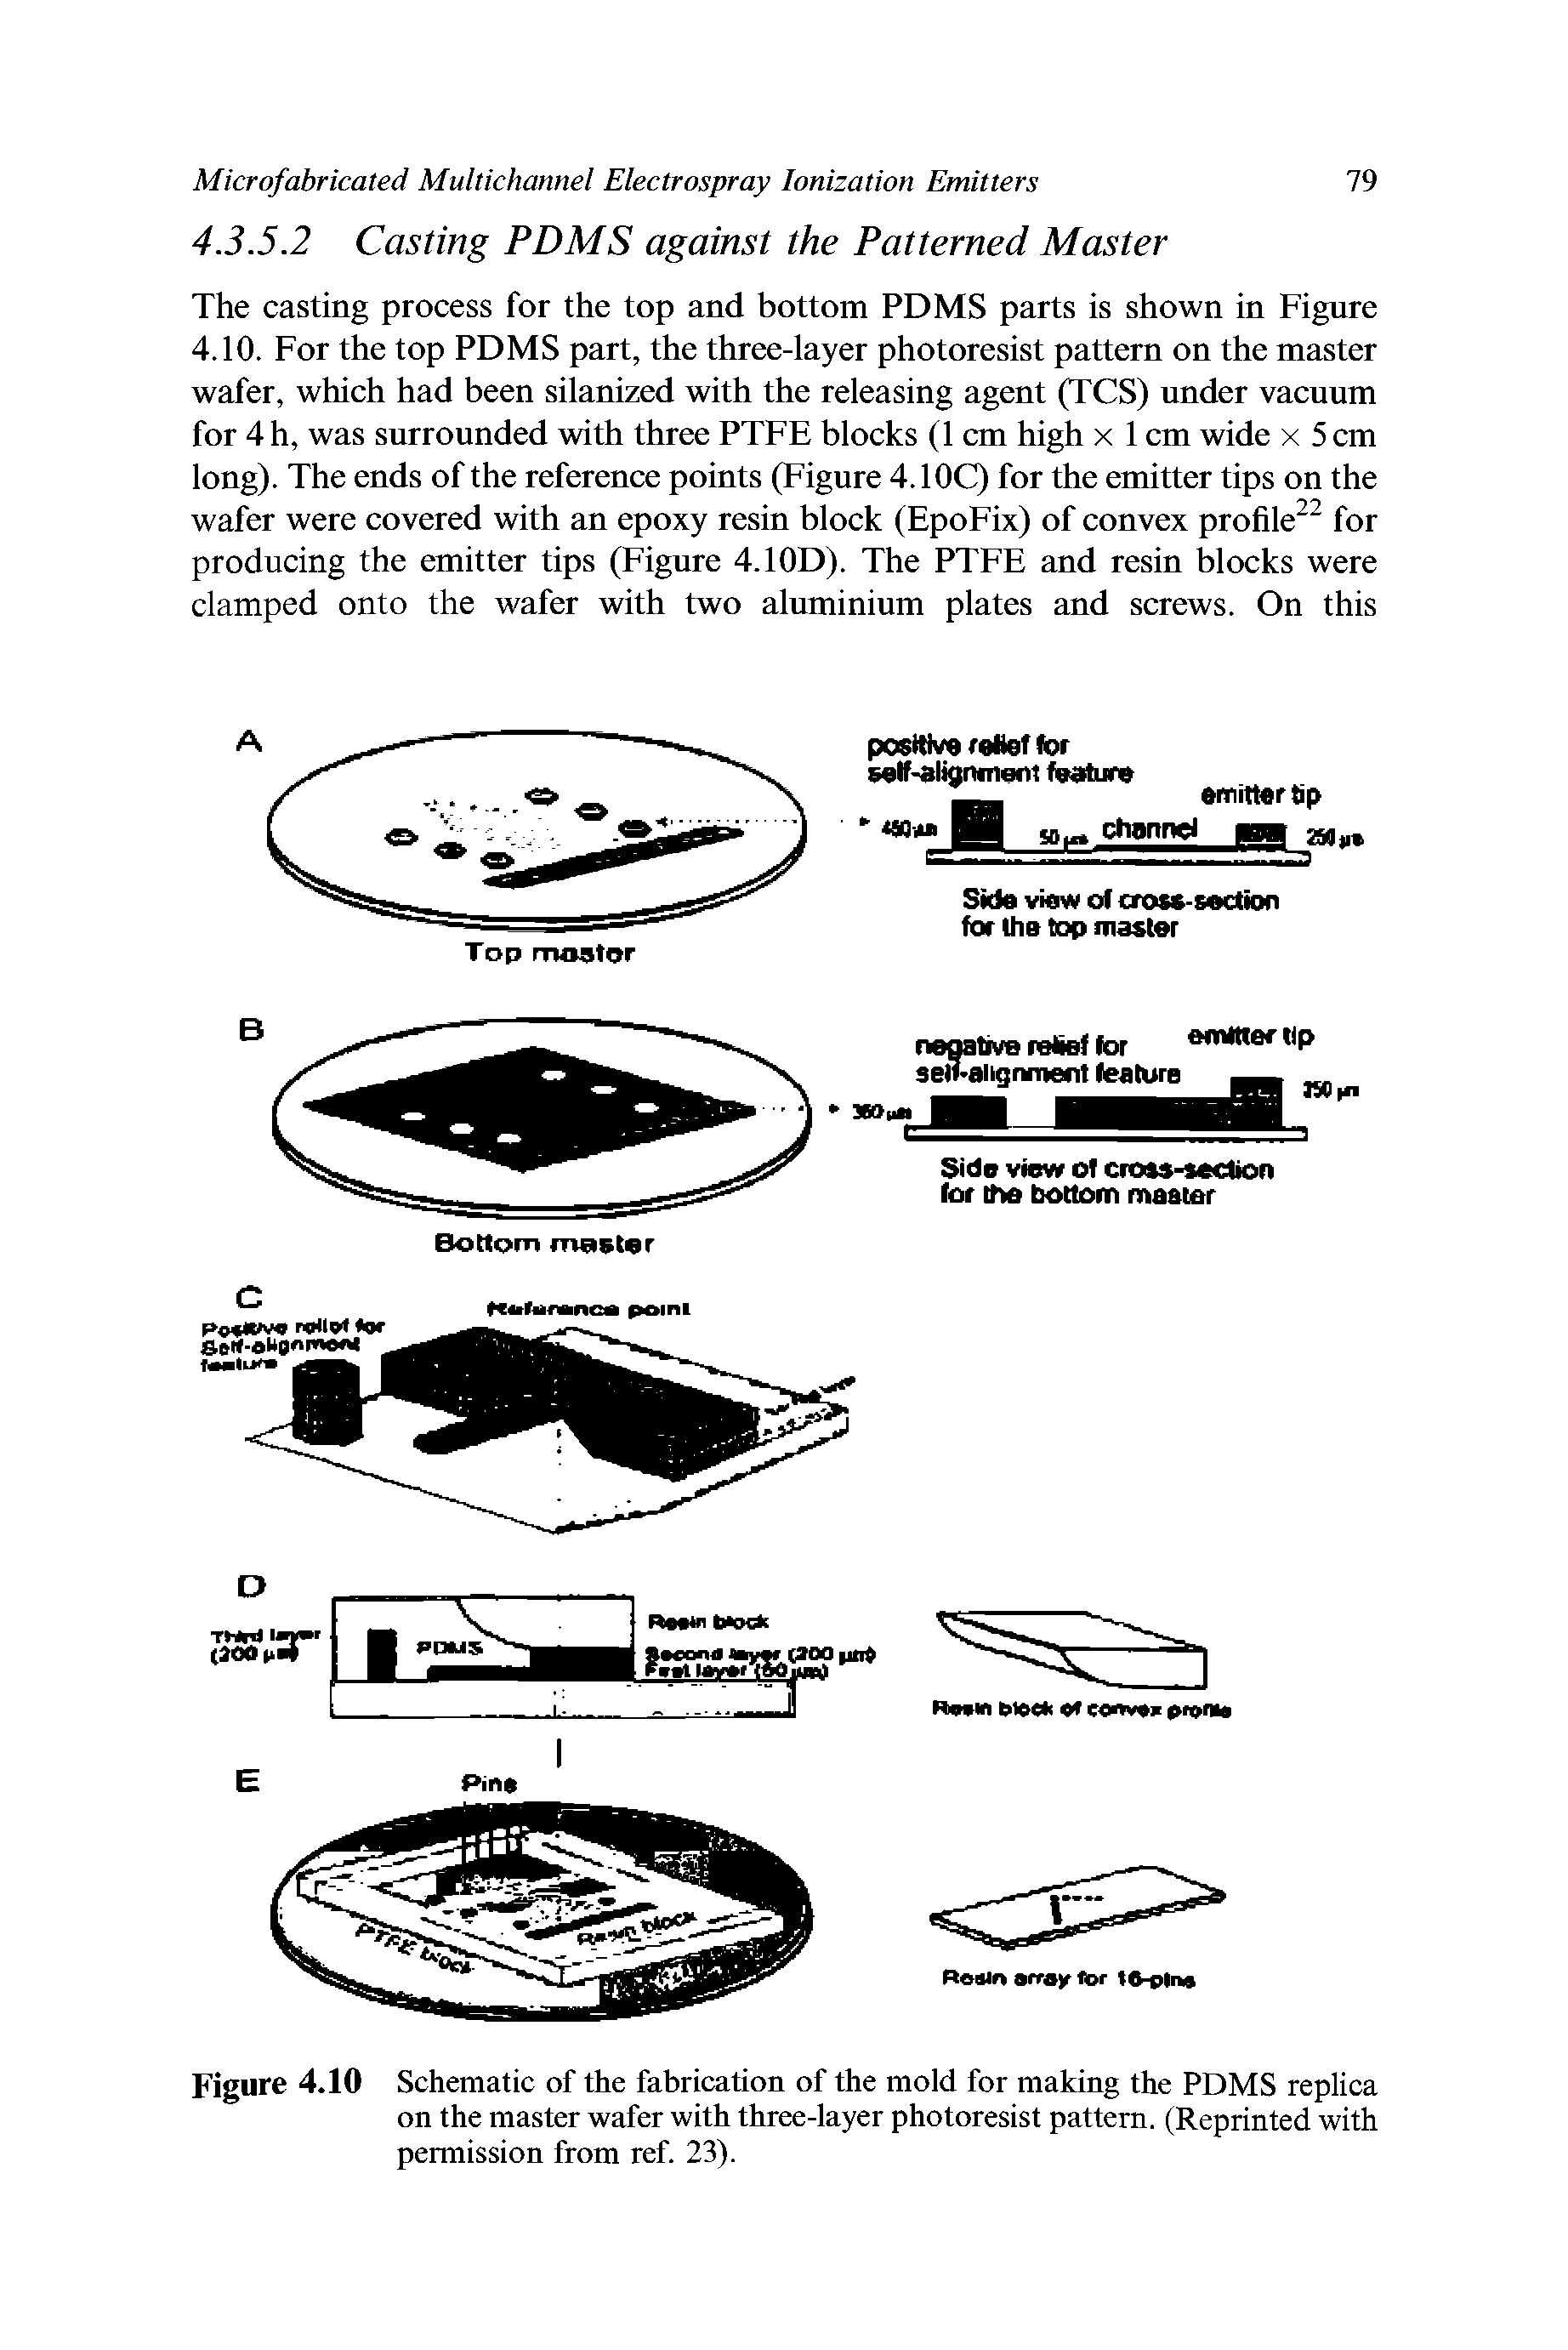 Figure 4.10 Schematic of the fabrication of the mold for making the PDMS replica on the master wafer with three-layer photoresist pattern. (Reprinted with permission from ref. 23).